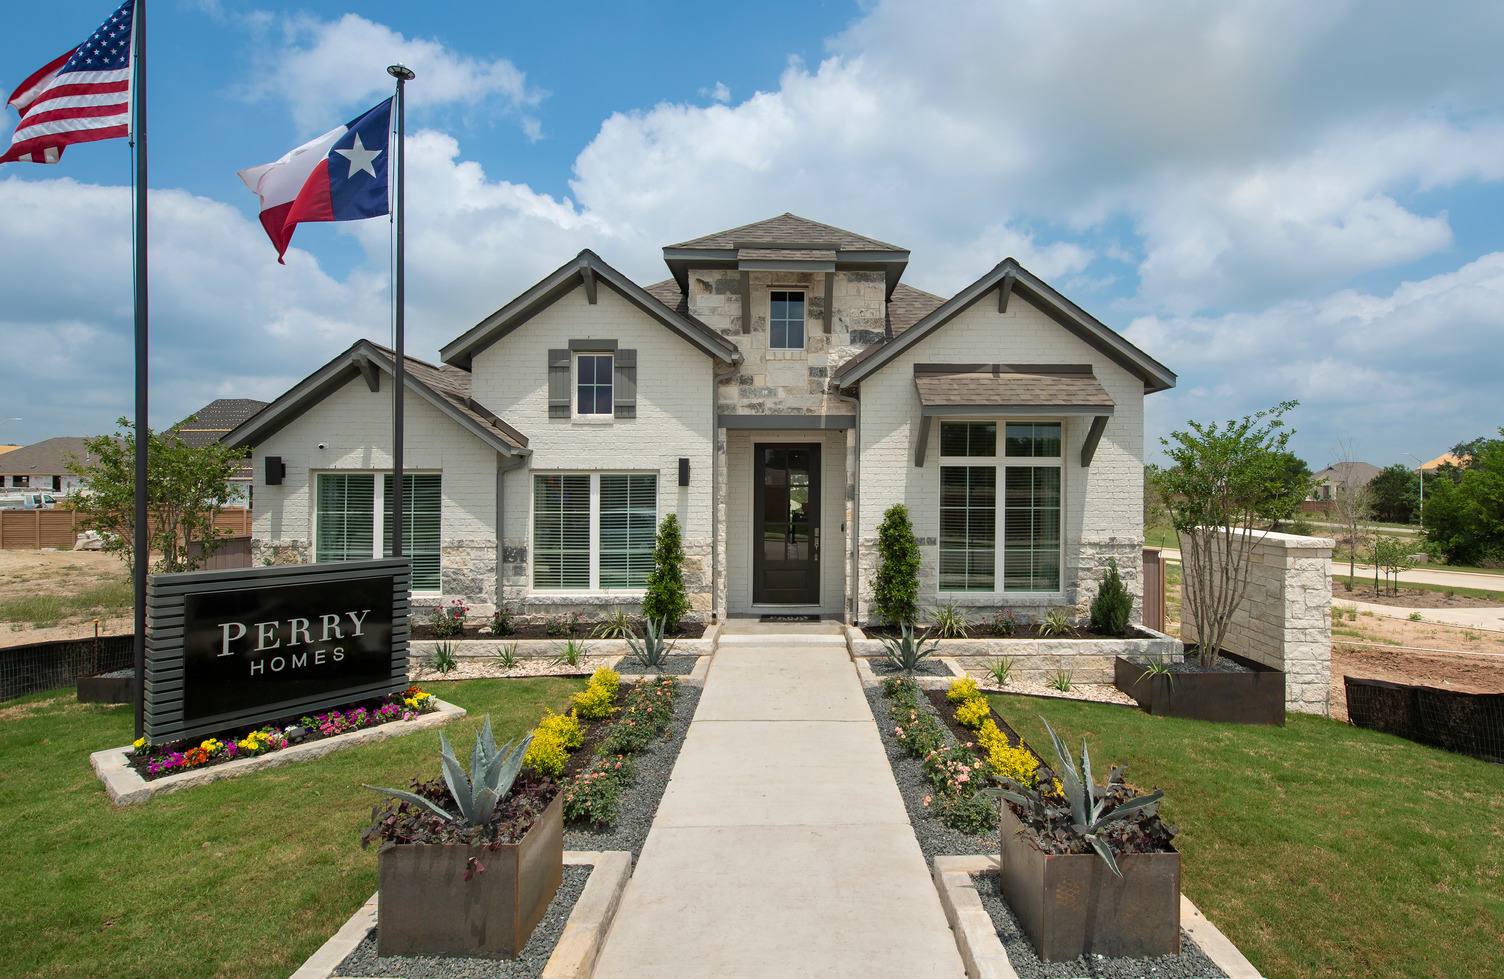 Perry Homes Anthem brick and stone model home